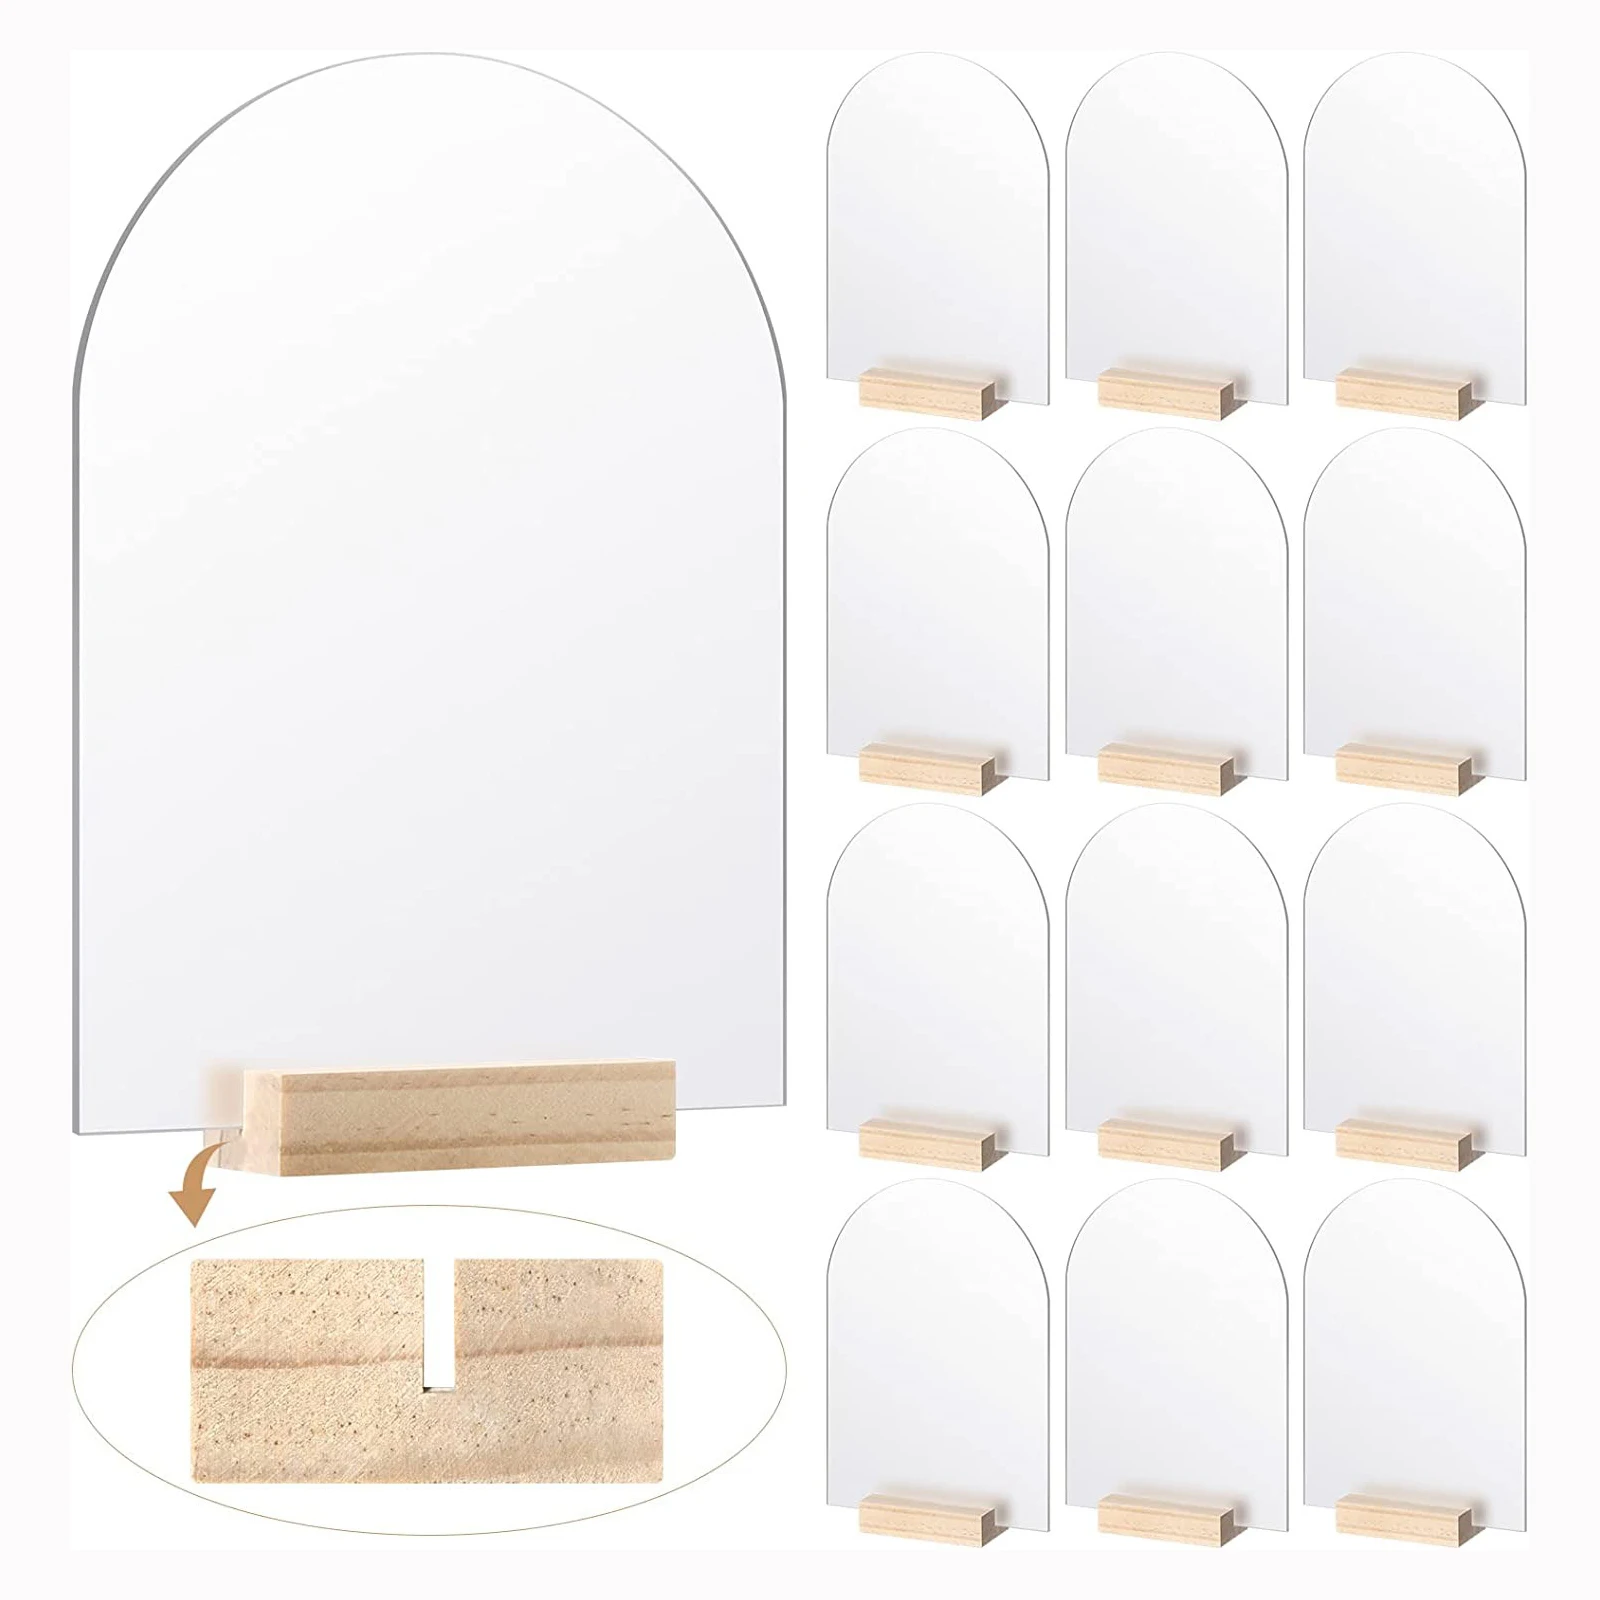 

Frosted Blank Acrylic Sheet with Wood Stand Holder Arched Sign Table Number Card w/ Base for Wedding Party Centerpieces Decor